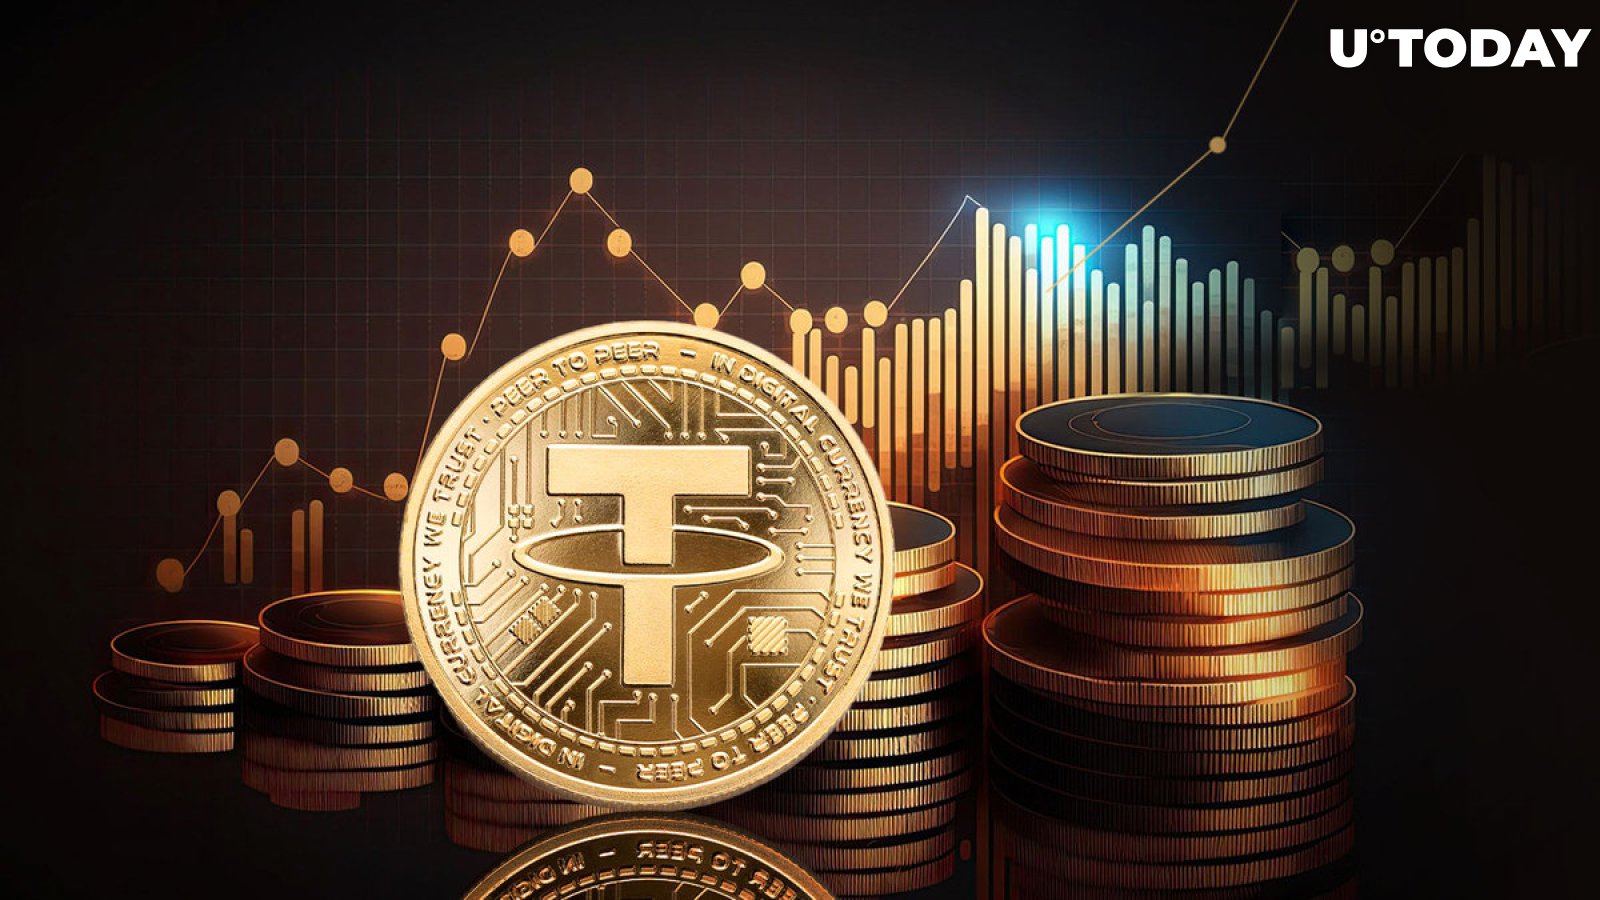 Tether's $5.25 Billion Surge Sparks Speculation, Is This Good for Bitcoin (BTC)?